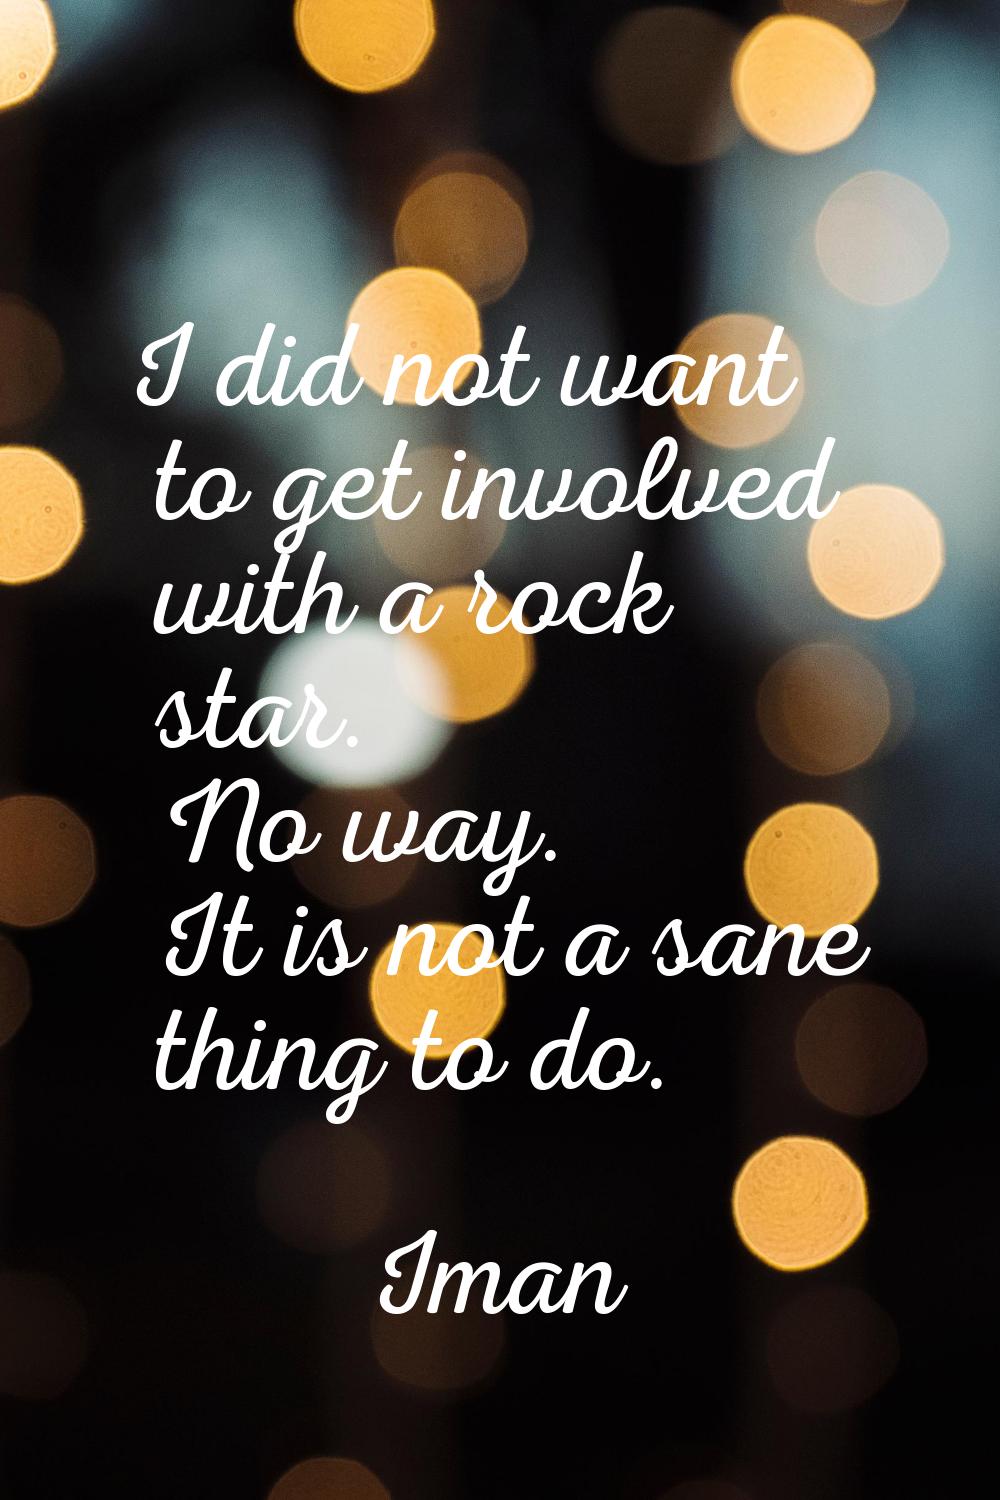 I did not want to get involved with a rock star. No way. It is not a sane thing to do.